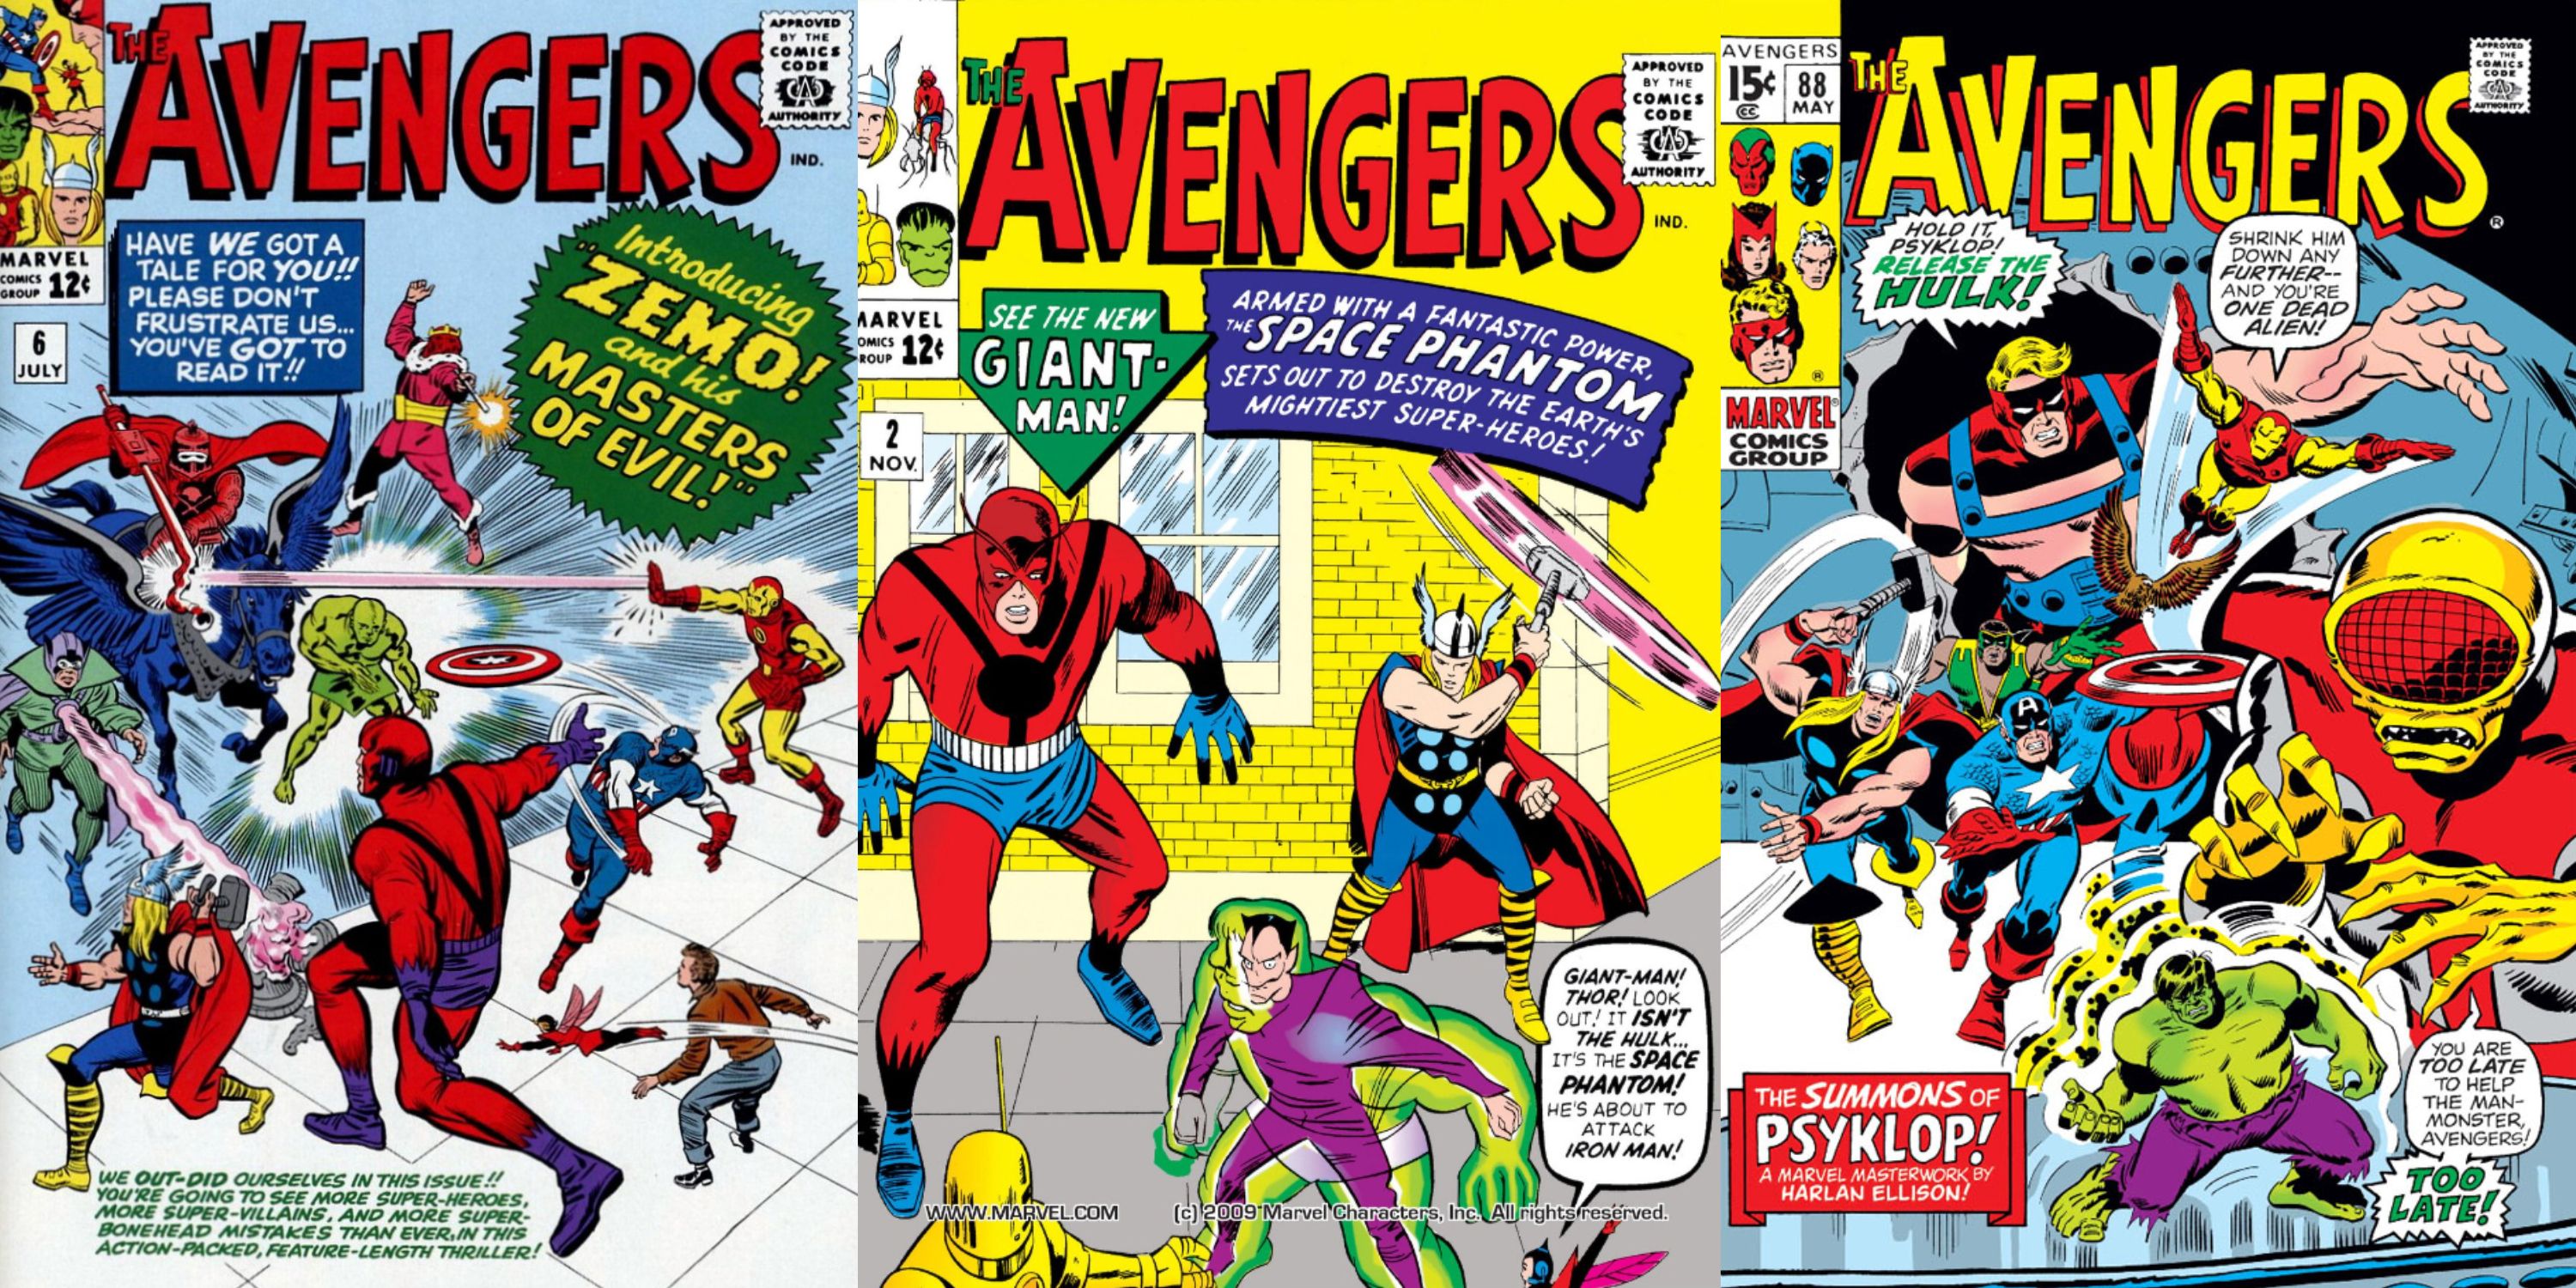 Left to right: the cover to Avengers 6 featuring the Avengers battling the Masters of Evil, the cover to Avengers 2 featuring the Avengers battling the Space Phantom, and the cover to Avengers 88 featuring the Avengers rushing Psyklop